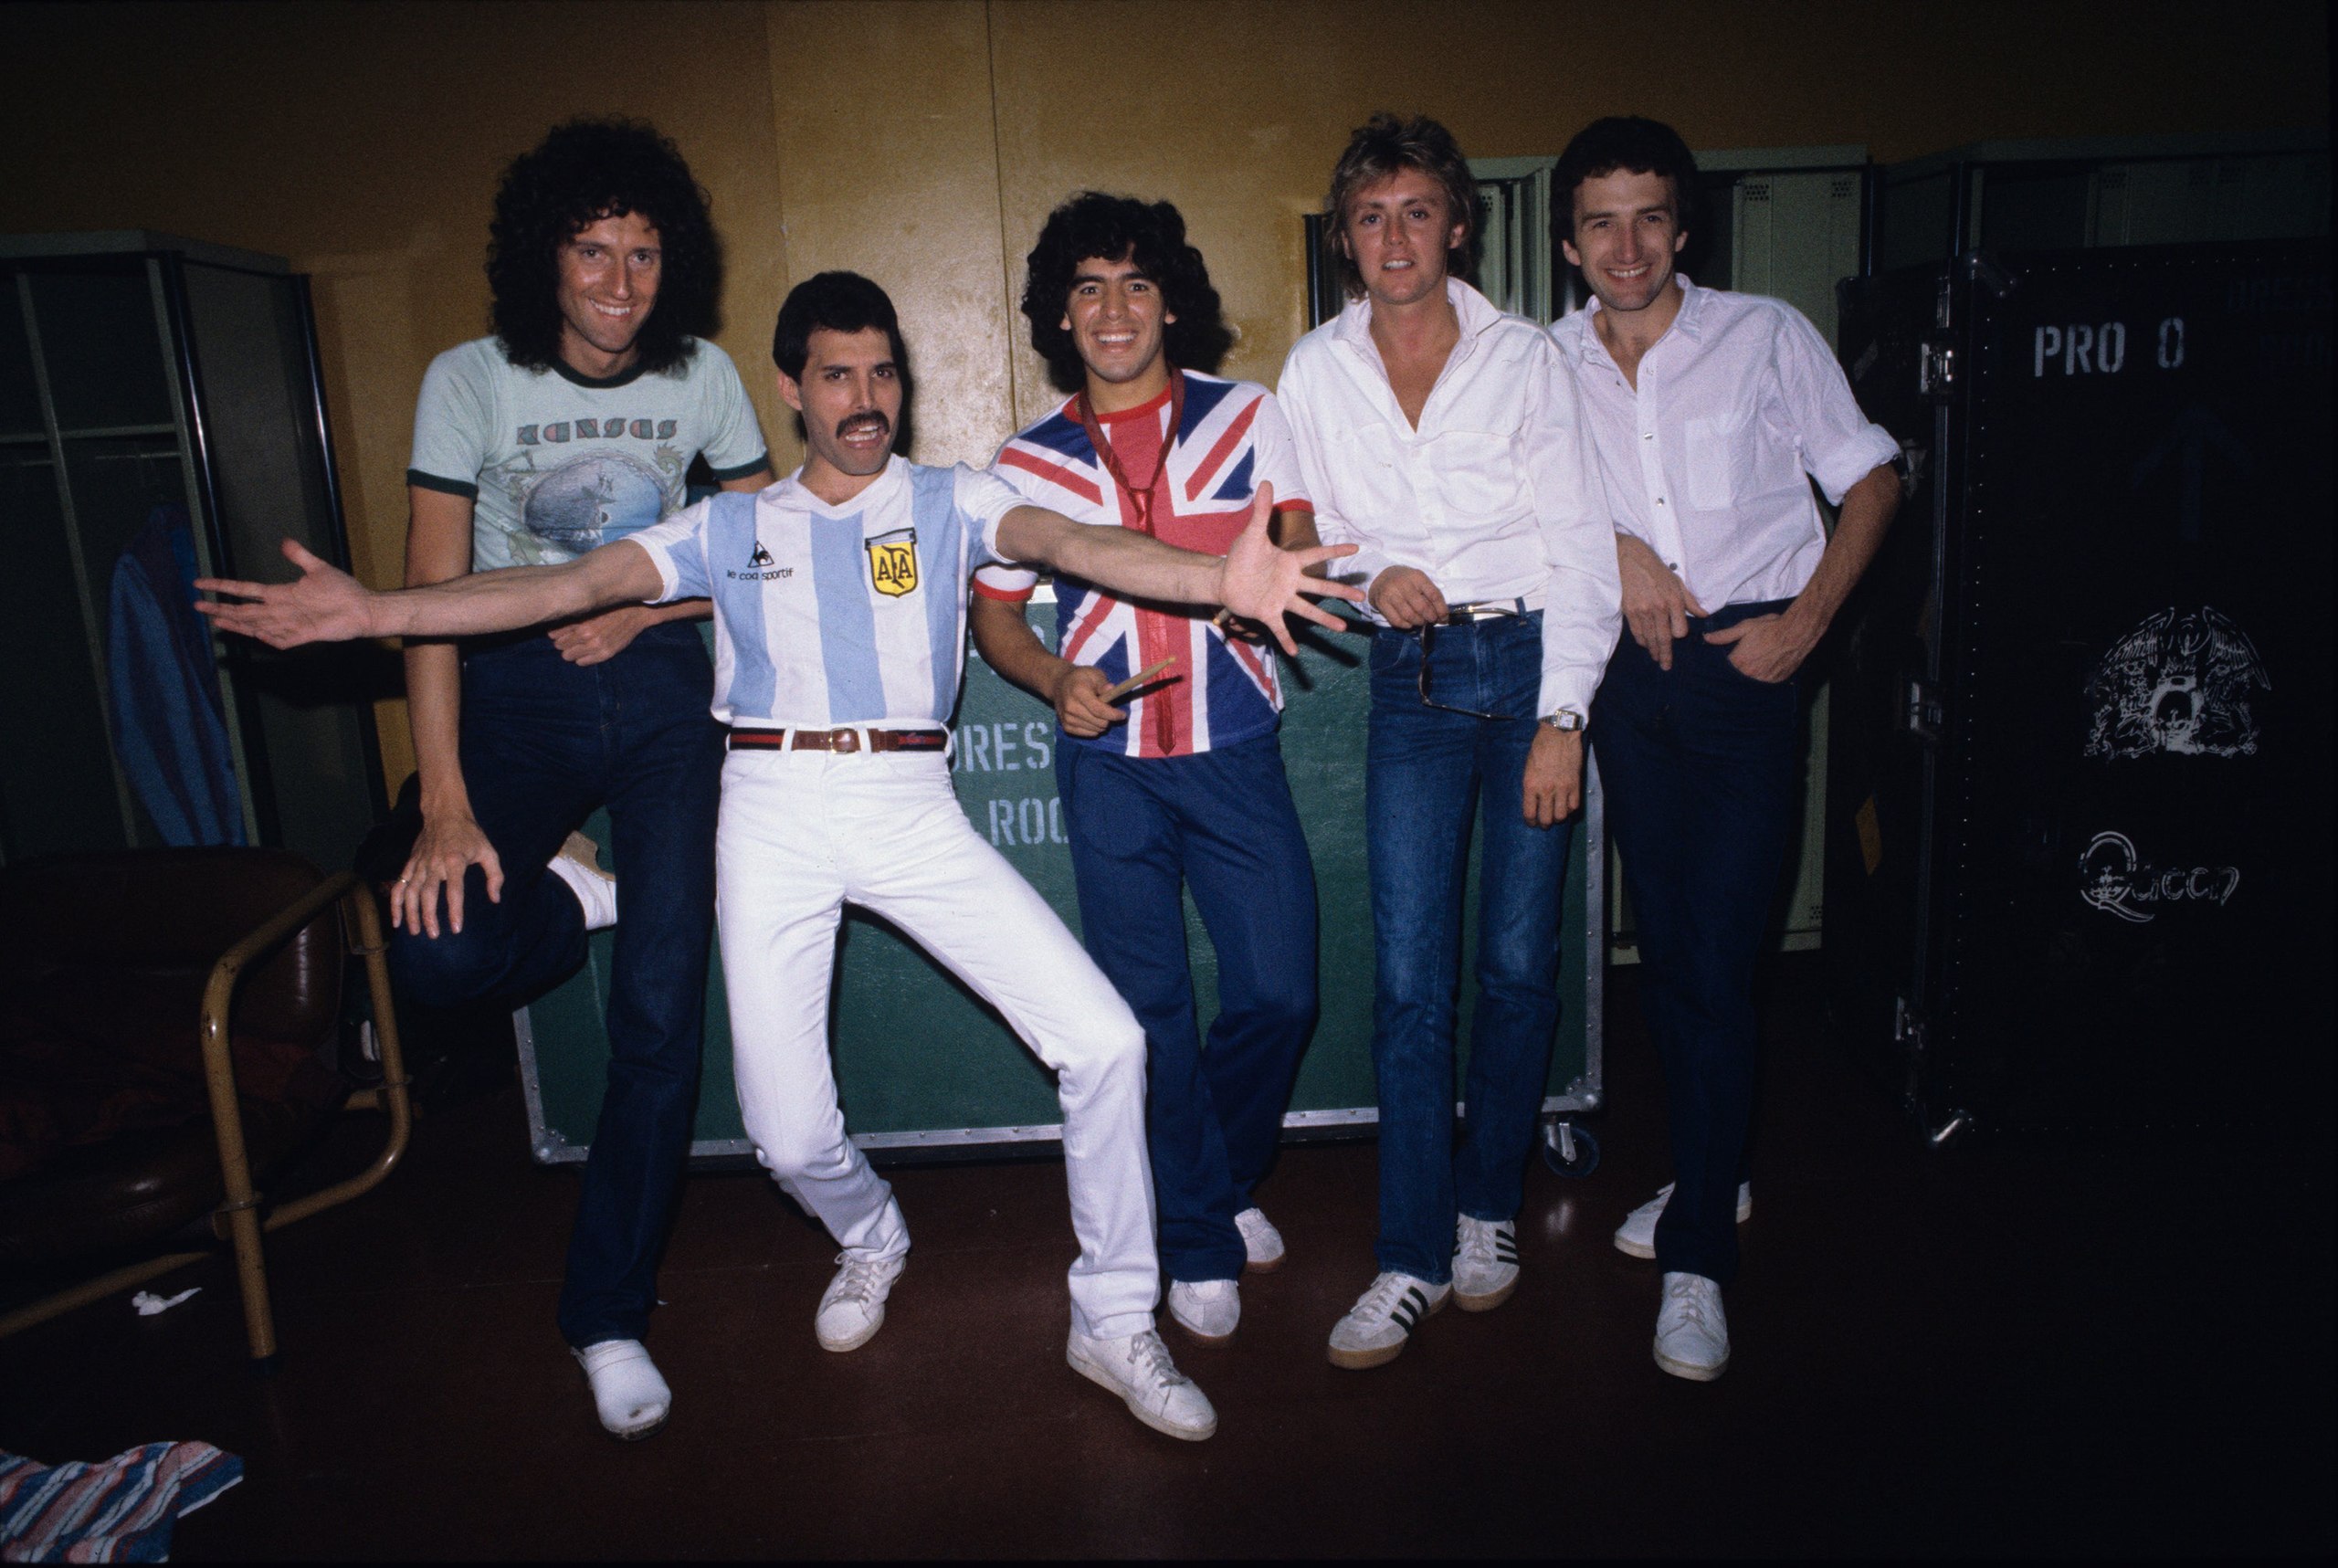 English rock band Queen (with Freddy Mercury in an Argentina jersey) meeting Diego Maradona (wearing an Union Flag jersey) before their last concert in Argentina during the The Game Tour.
